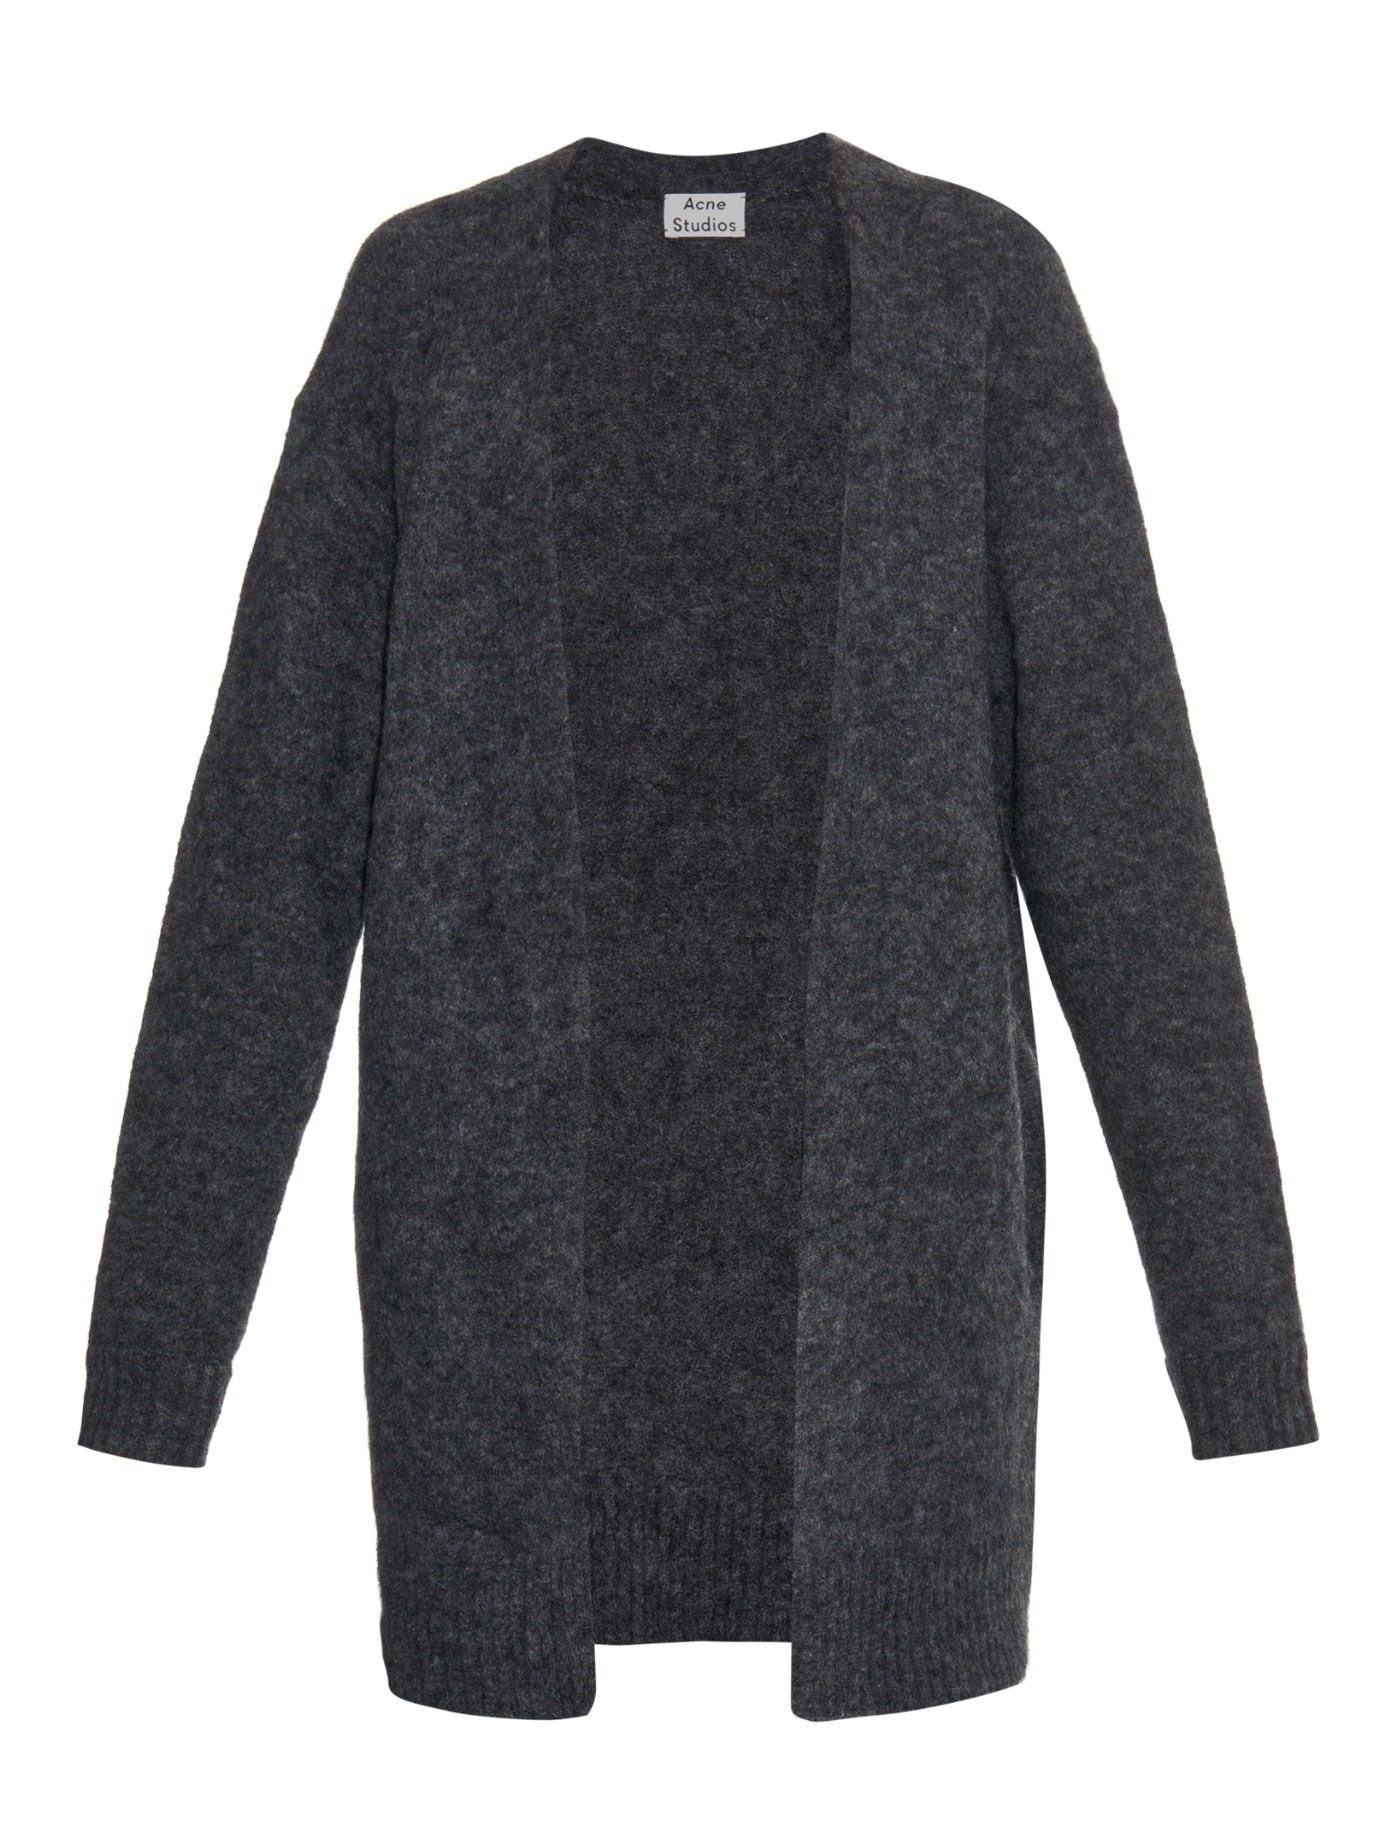 Lyst - Acne Studios Raya Mohair And Wool-blend Oversized Cardigan in Gray